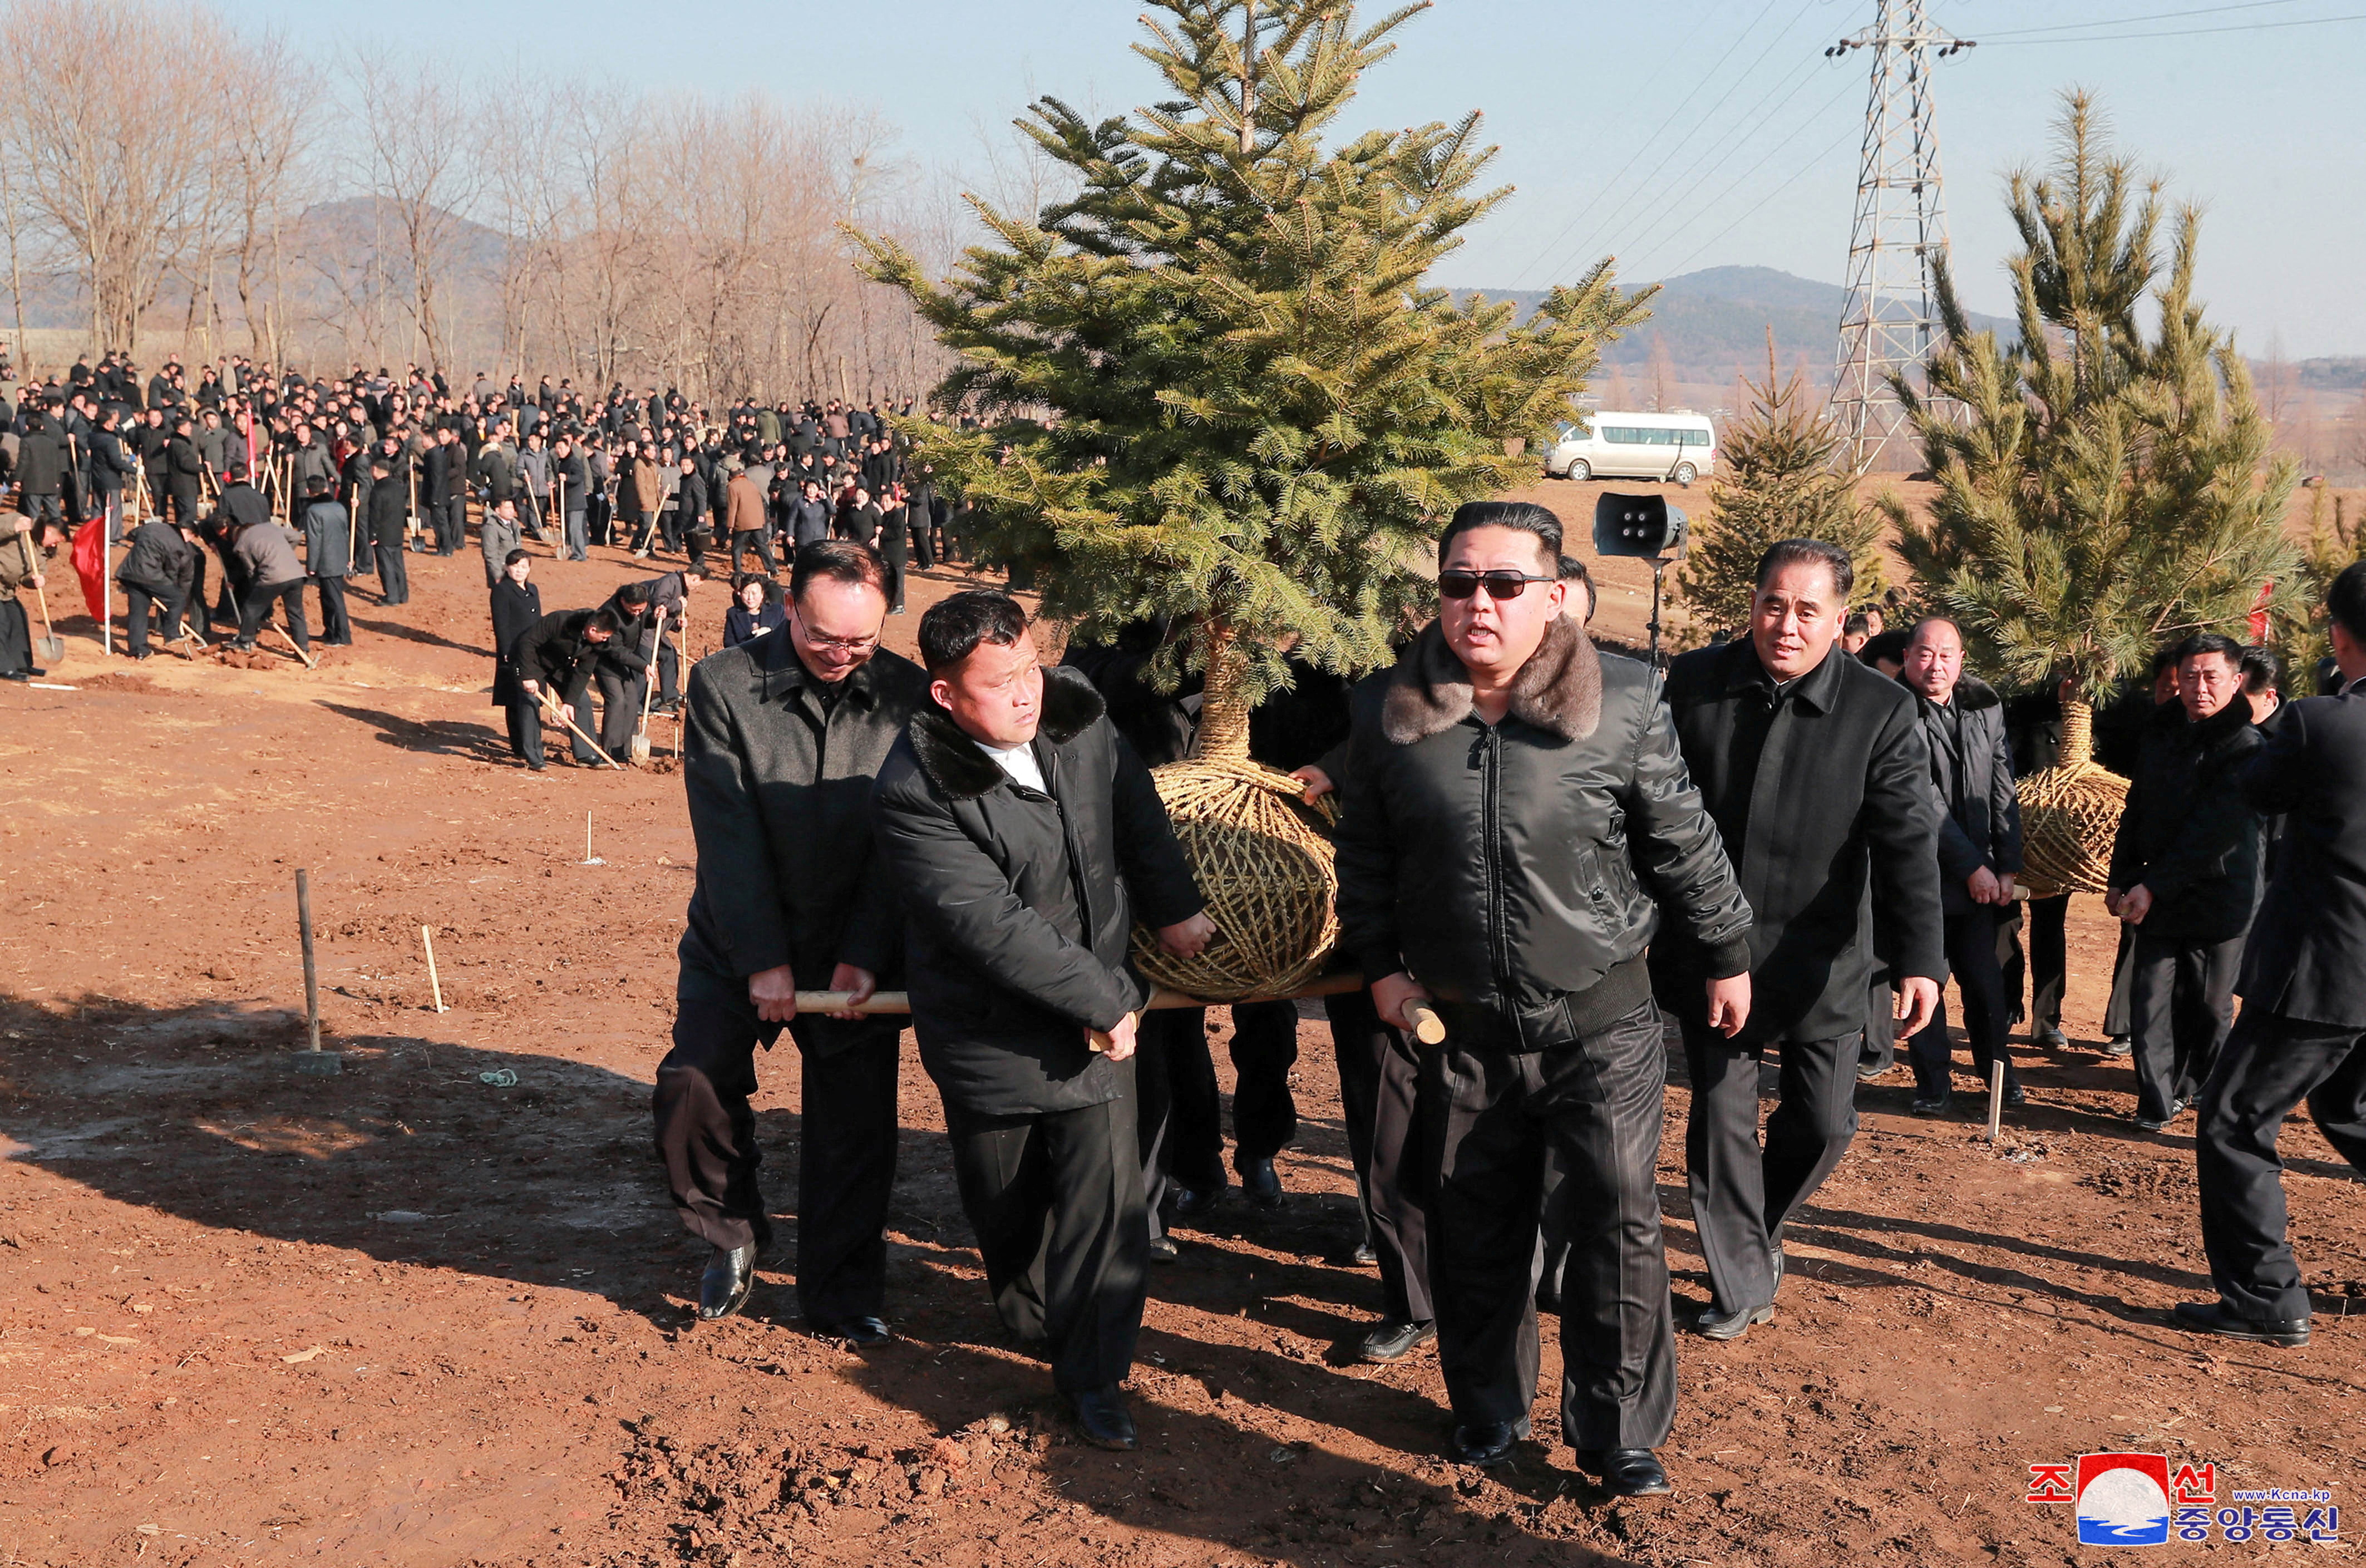 North Korean leader Kim Jong Un takes part in an event to plant trees with the participants of the 2nd Conference of Secretaries of Primary Committees of the Workers' Party of Korea